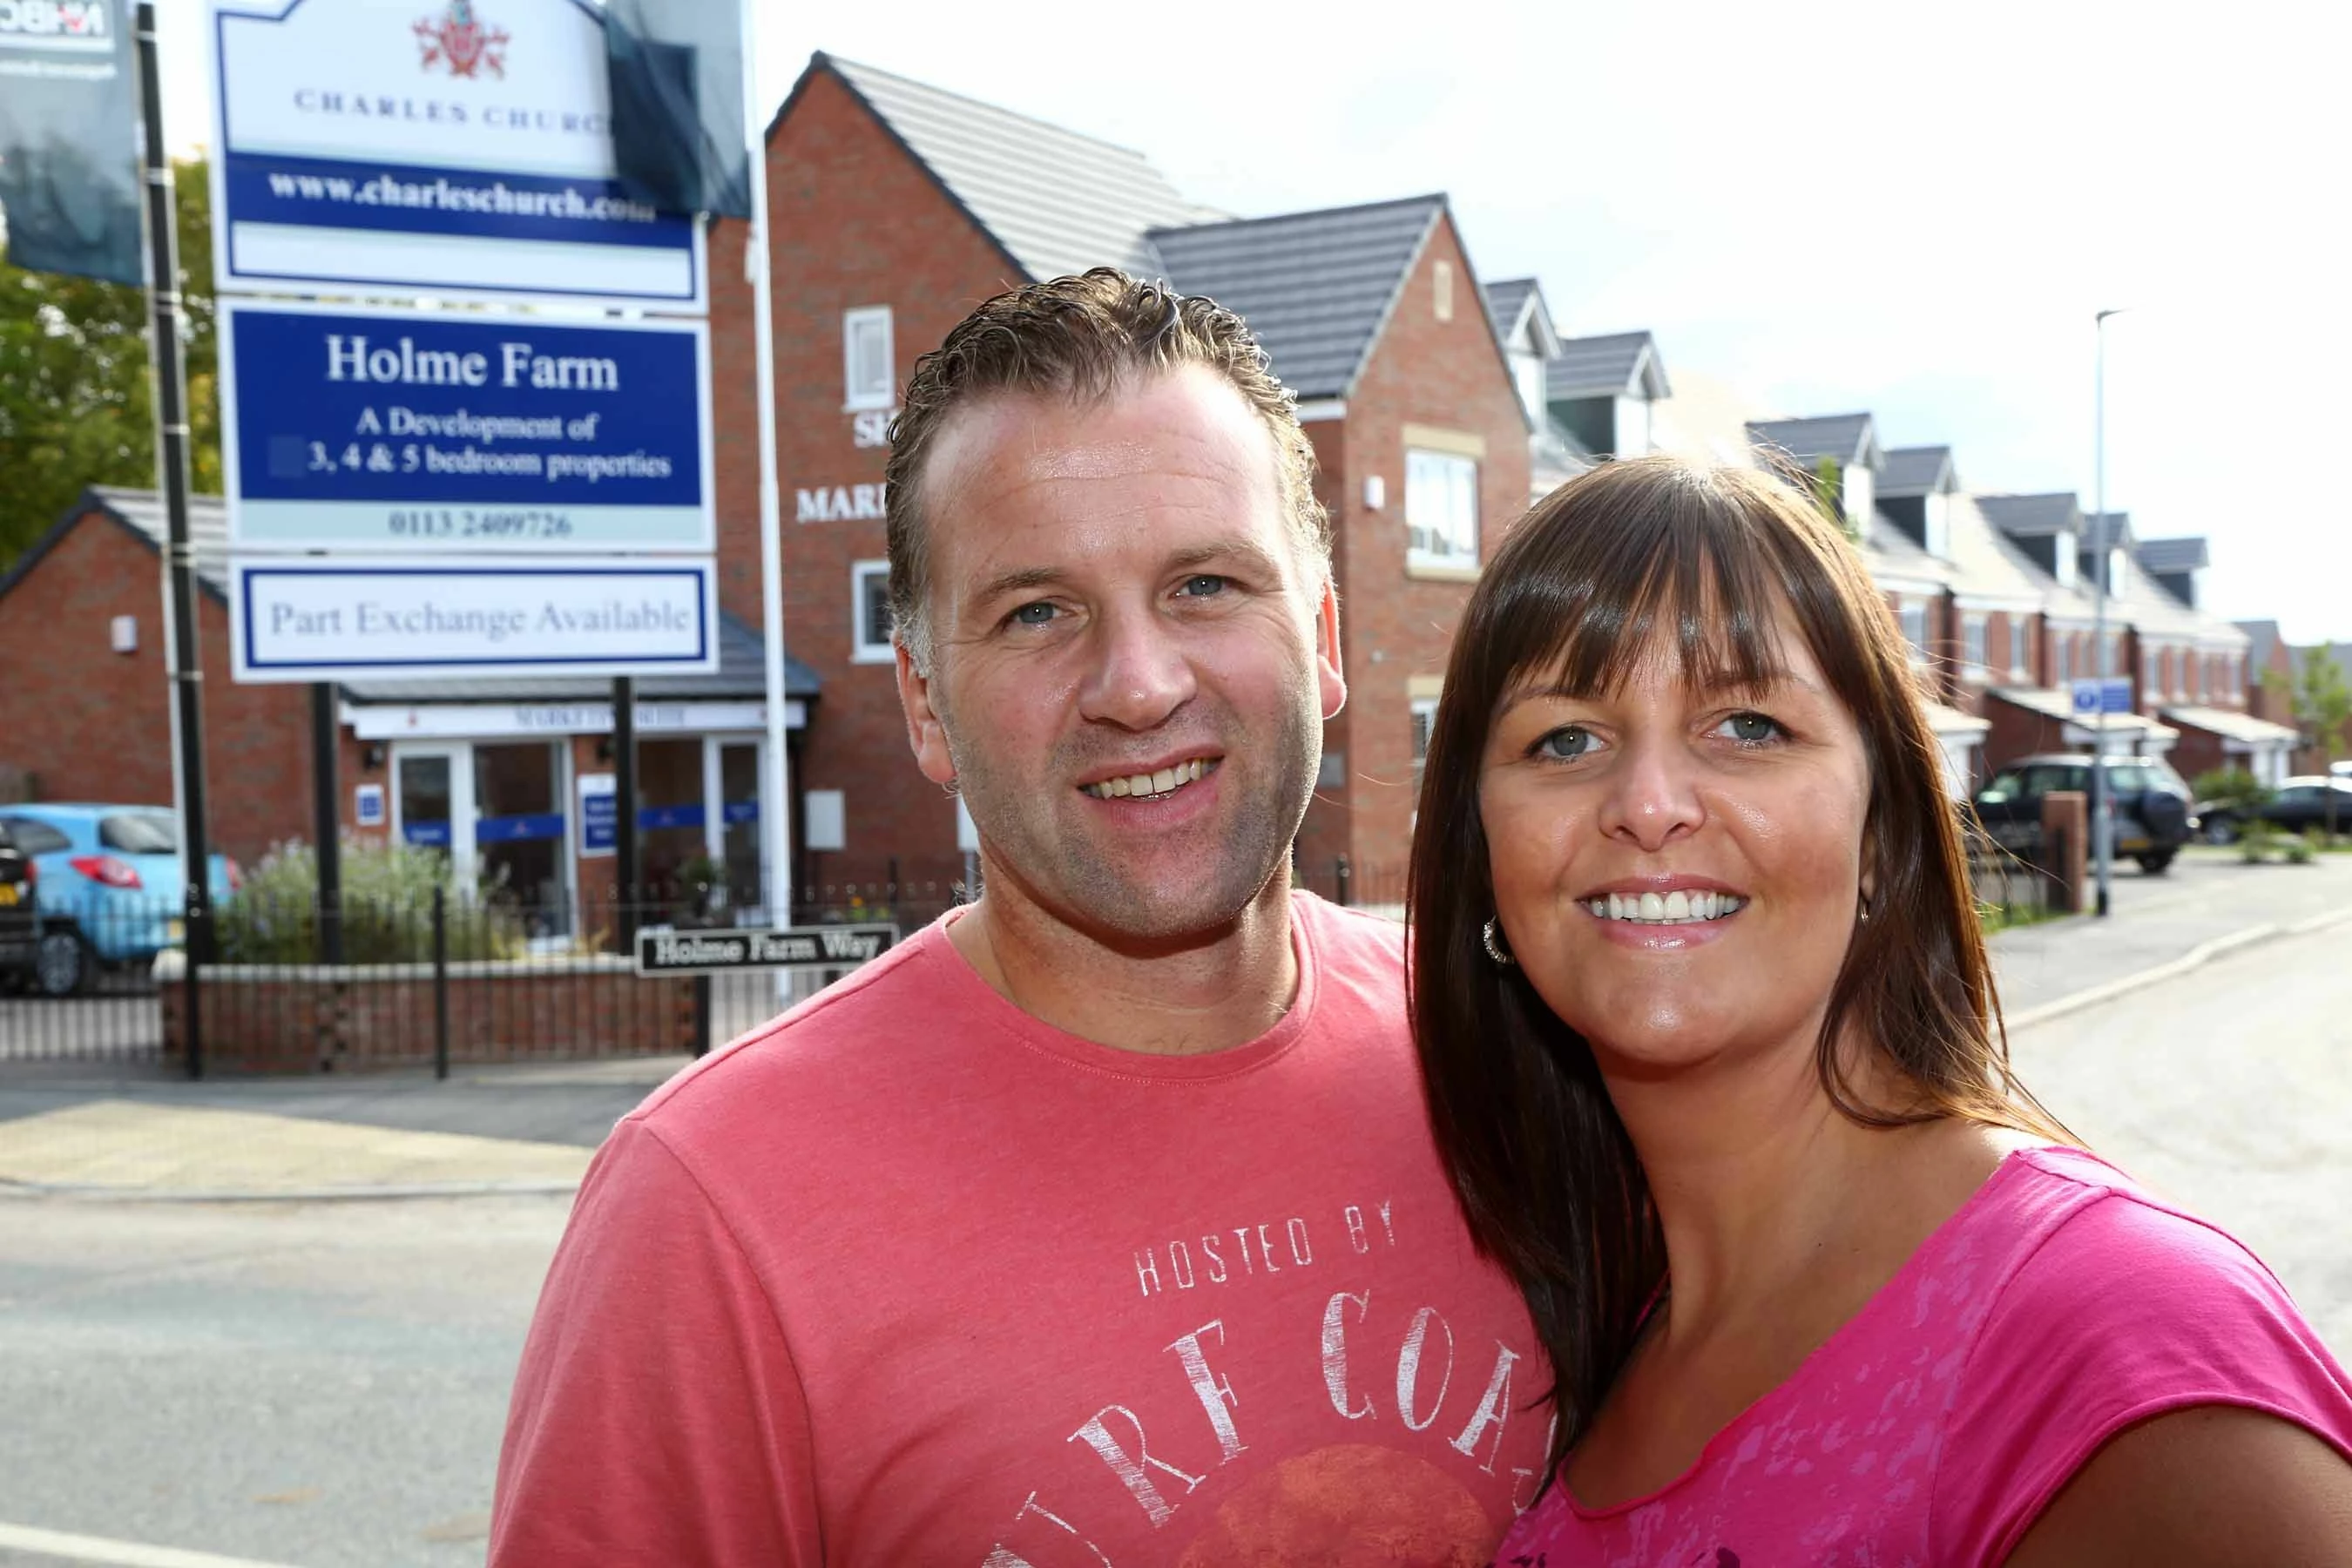 Newly-weds make their dream home move with Charles Church